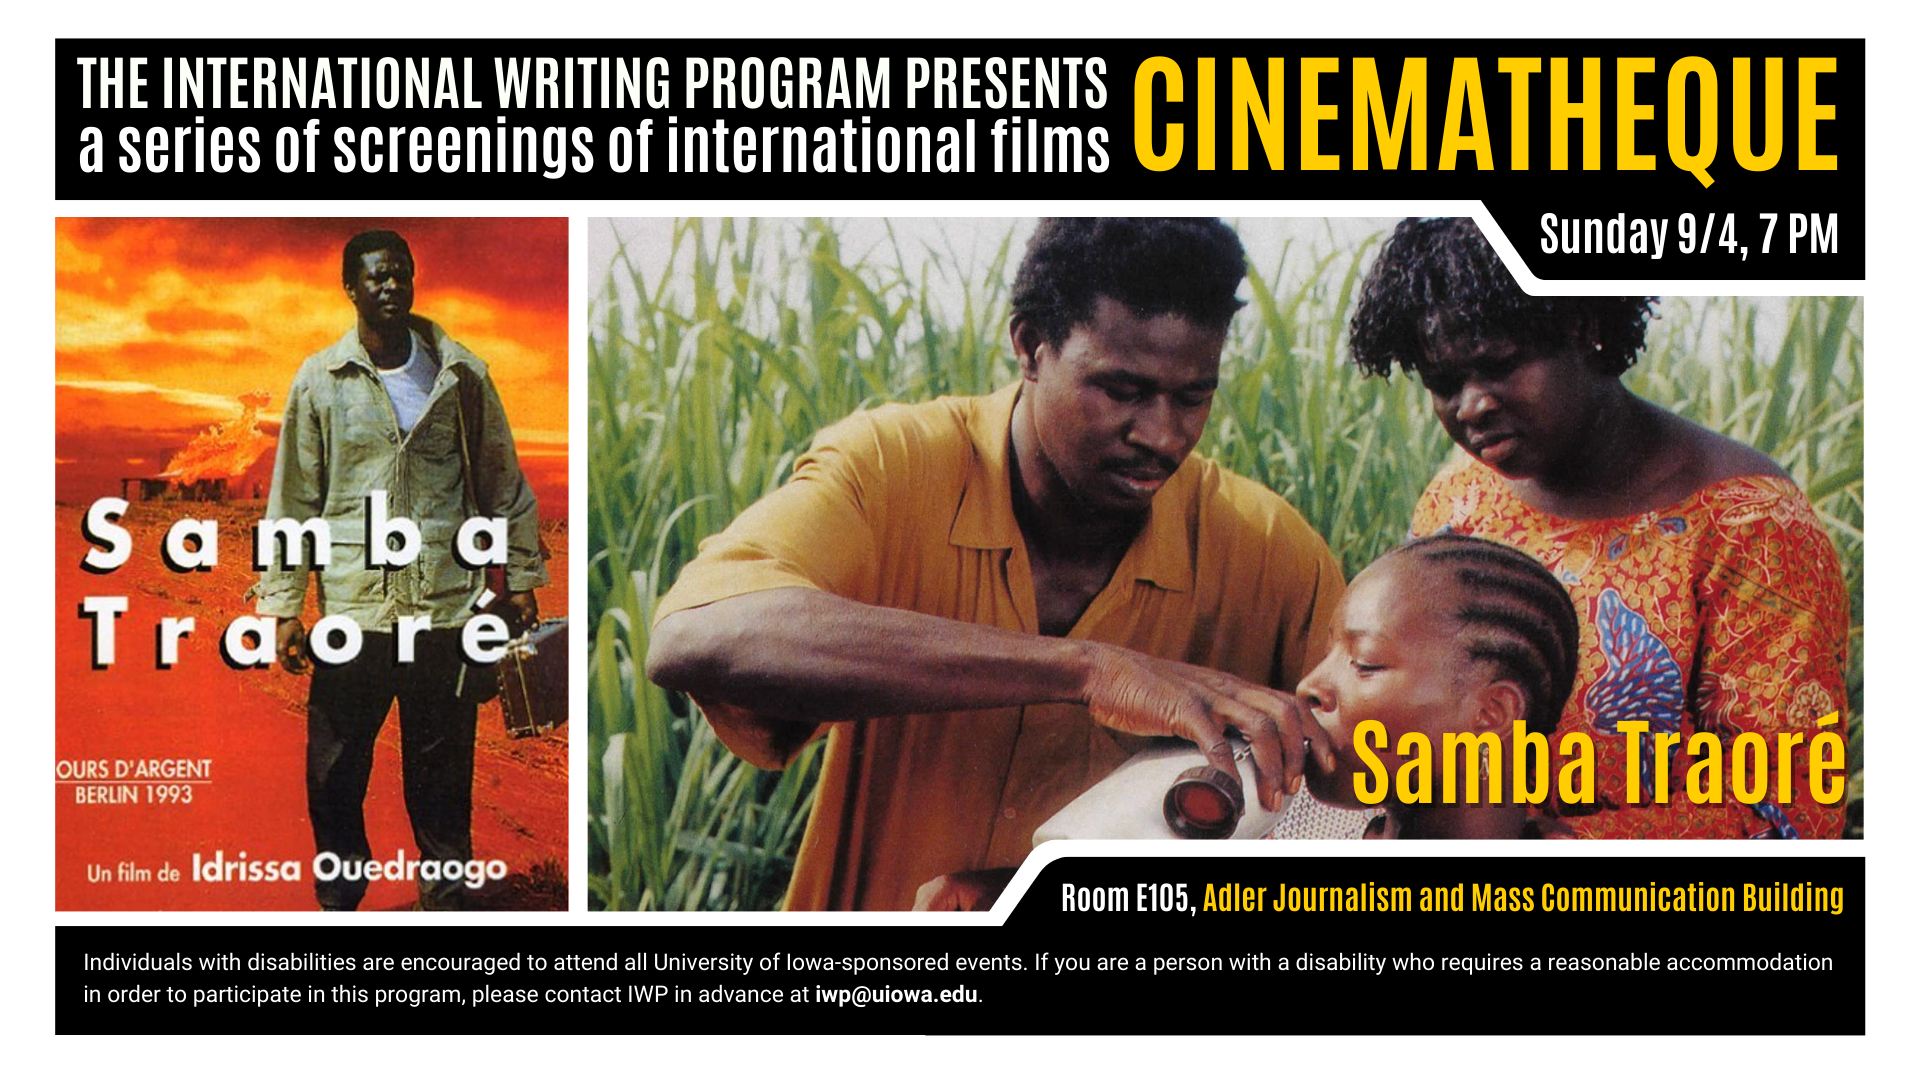 The International Writing Program presents a series of screenings of international films. CINEMATHEQUE. Sunday 9/4, 7 PM. Samba Traoré. Room E105, Adler Journalism and Mass Communication Building. Individuals with disabilities are encouraged to attend all University of Iowa-sponsored events. If you are a person with a disability who requires a reasonable accommodation in order to participate in this program, please contact IWP in advance at iwp@uiowa.edu.